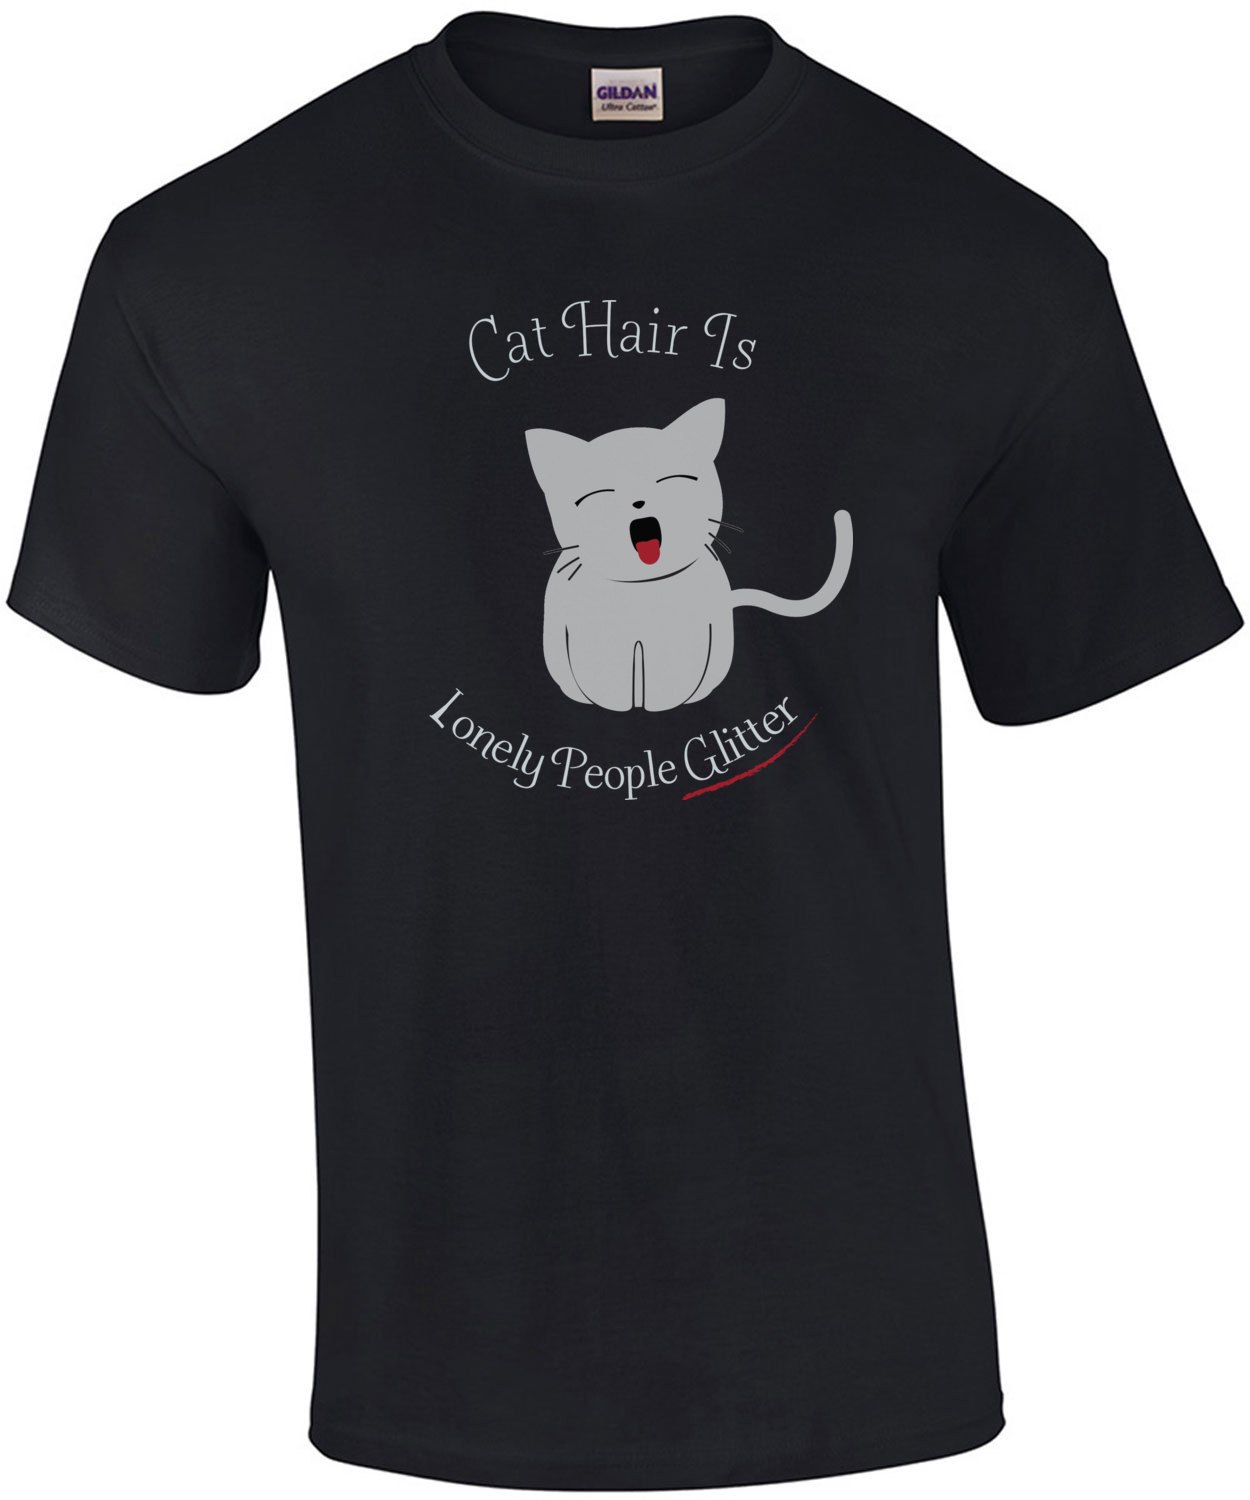 Cat Hair Is Lonely People Glitter T-Shirt